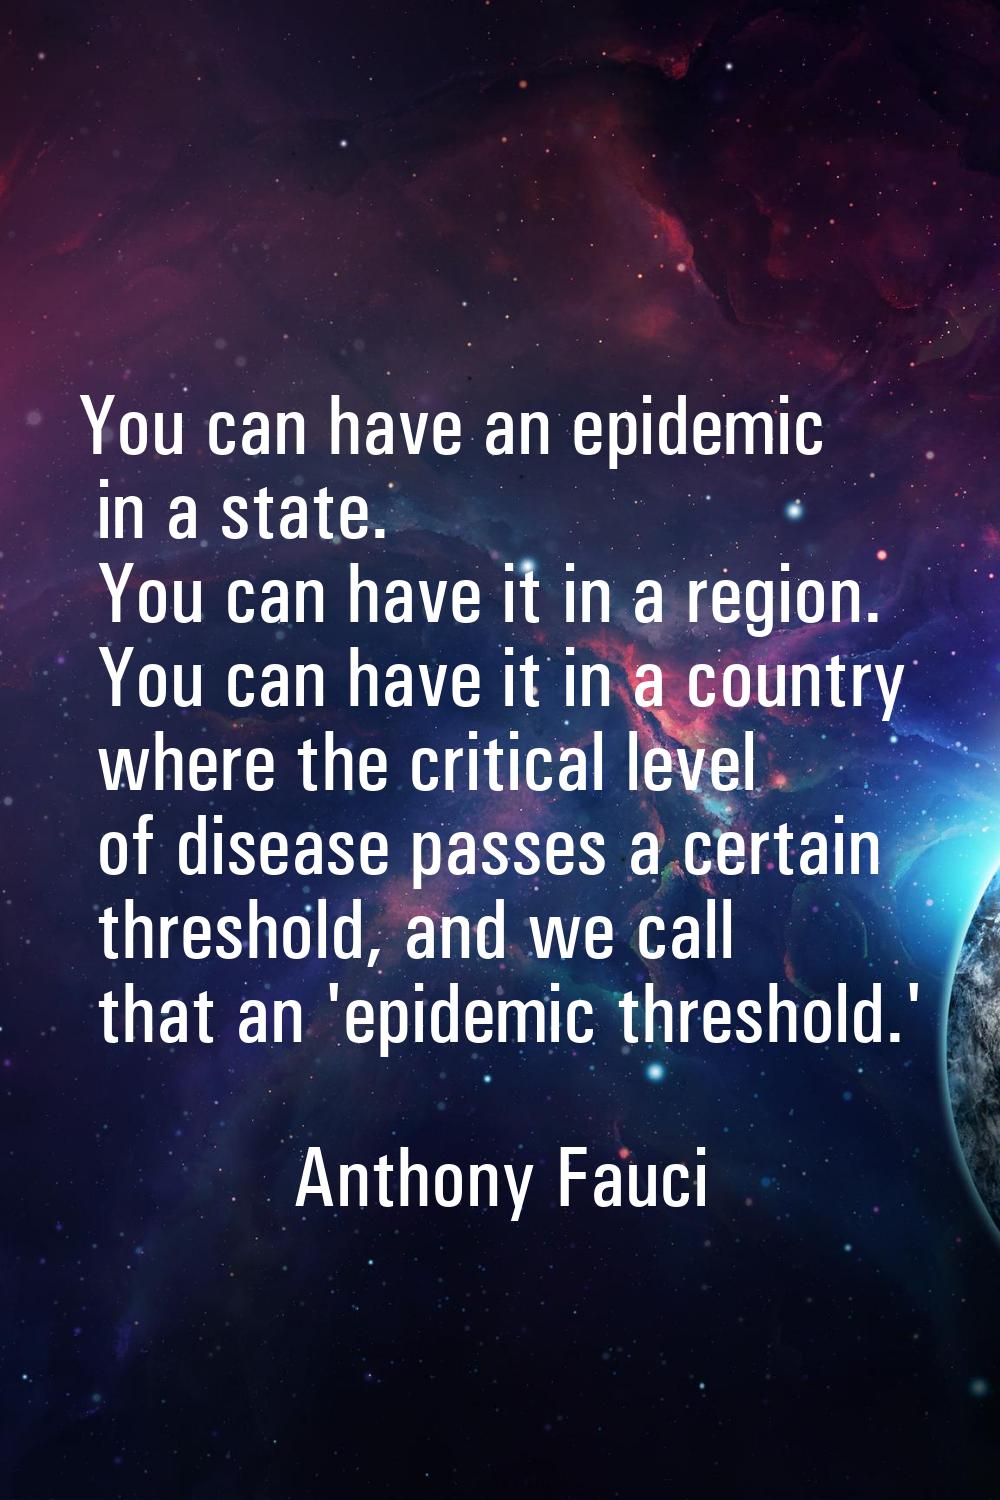 You can have an epidemic in a state. You can have it in a region. You can have it in a country wher